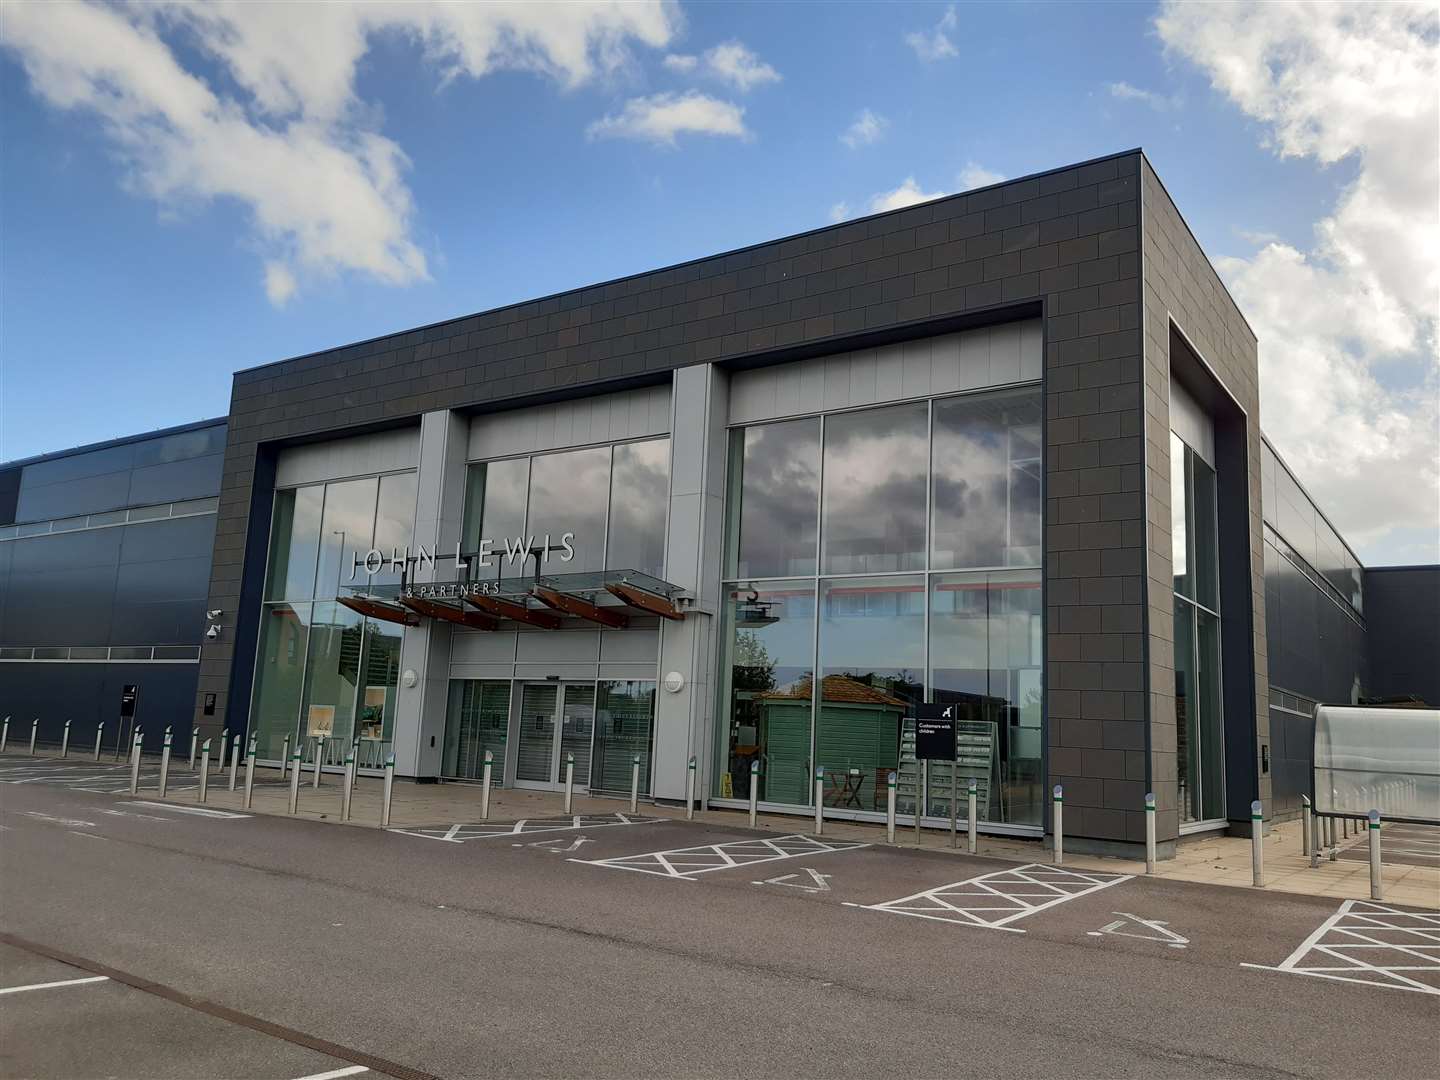 The John Lewis store in Ashford was targeted